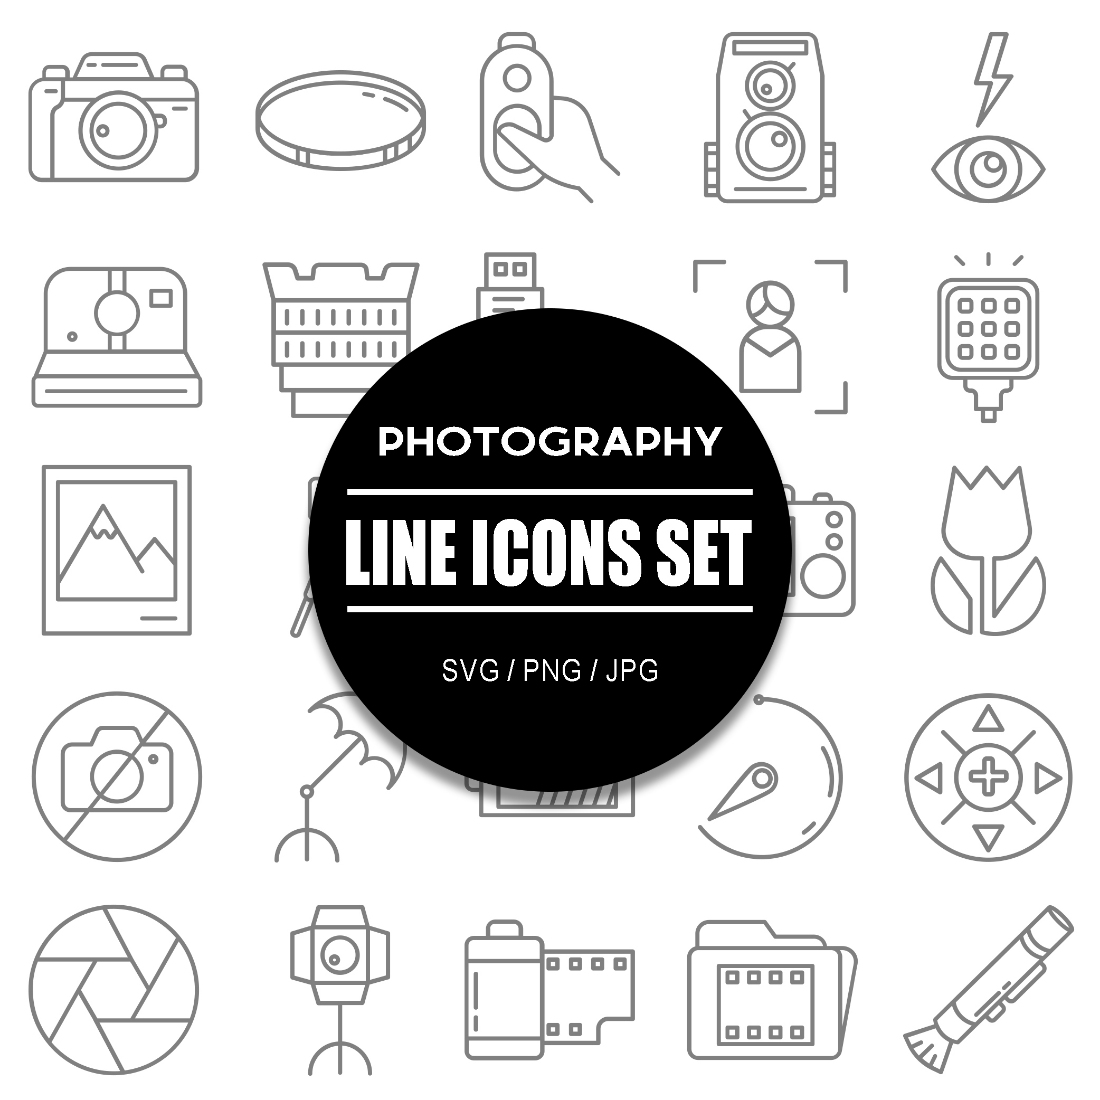 Photography Line Icon Set cover image.